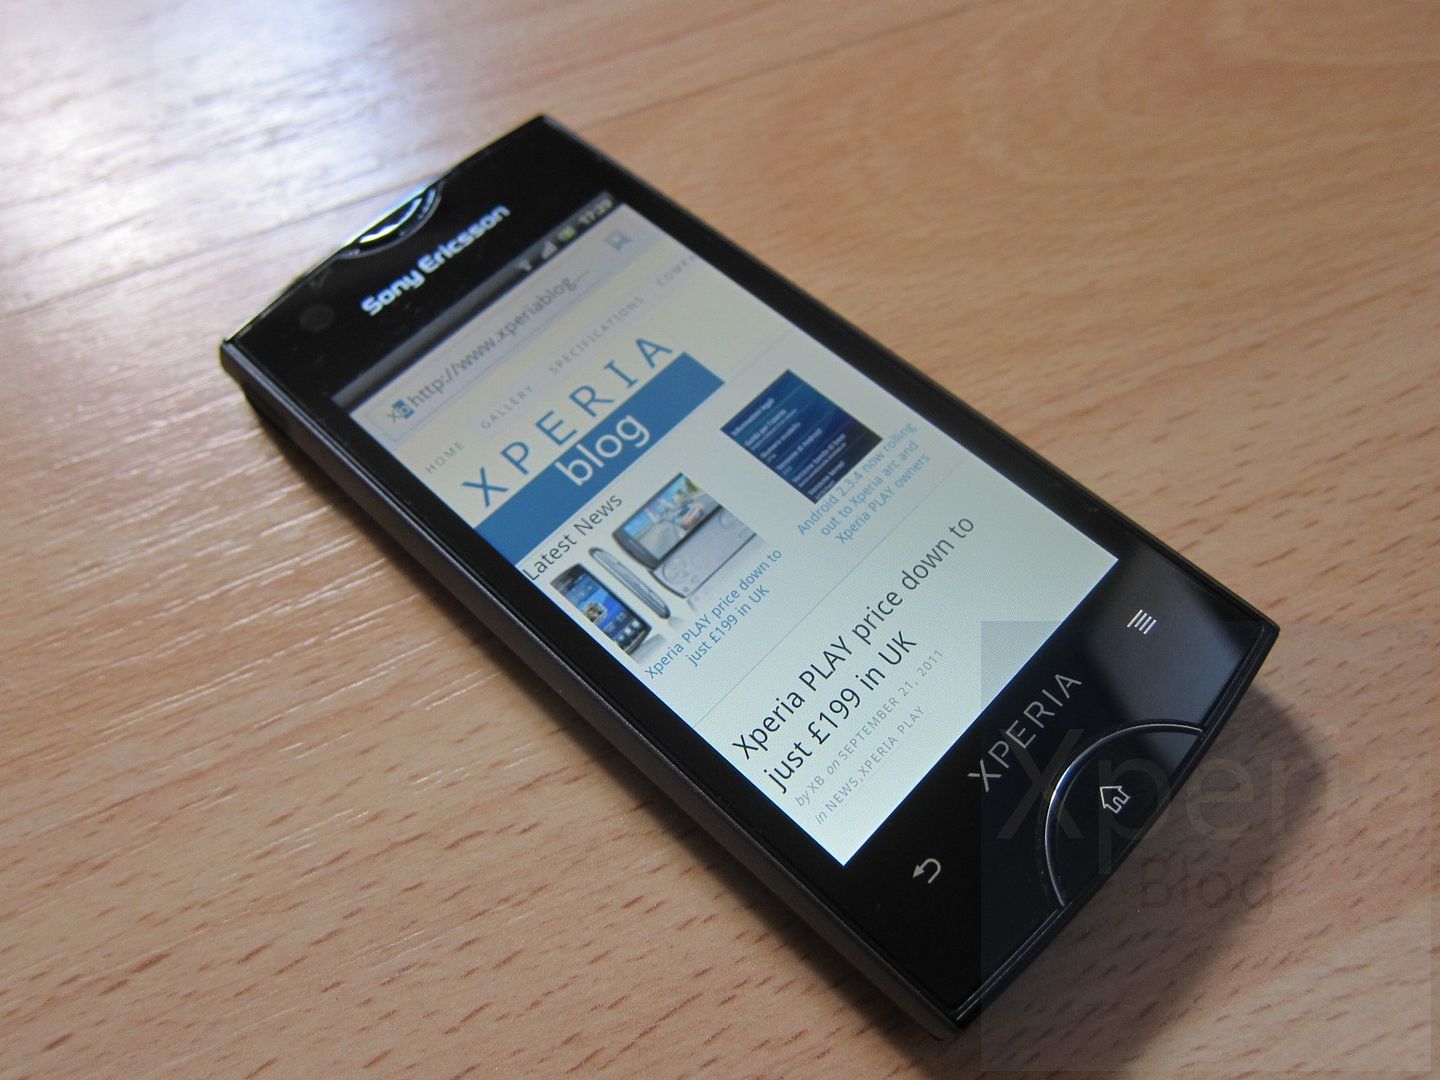 Xperia ray Review